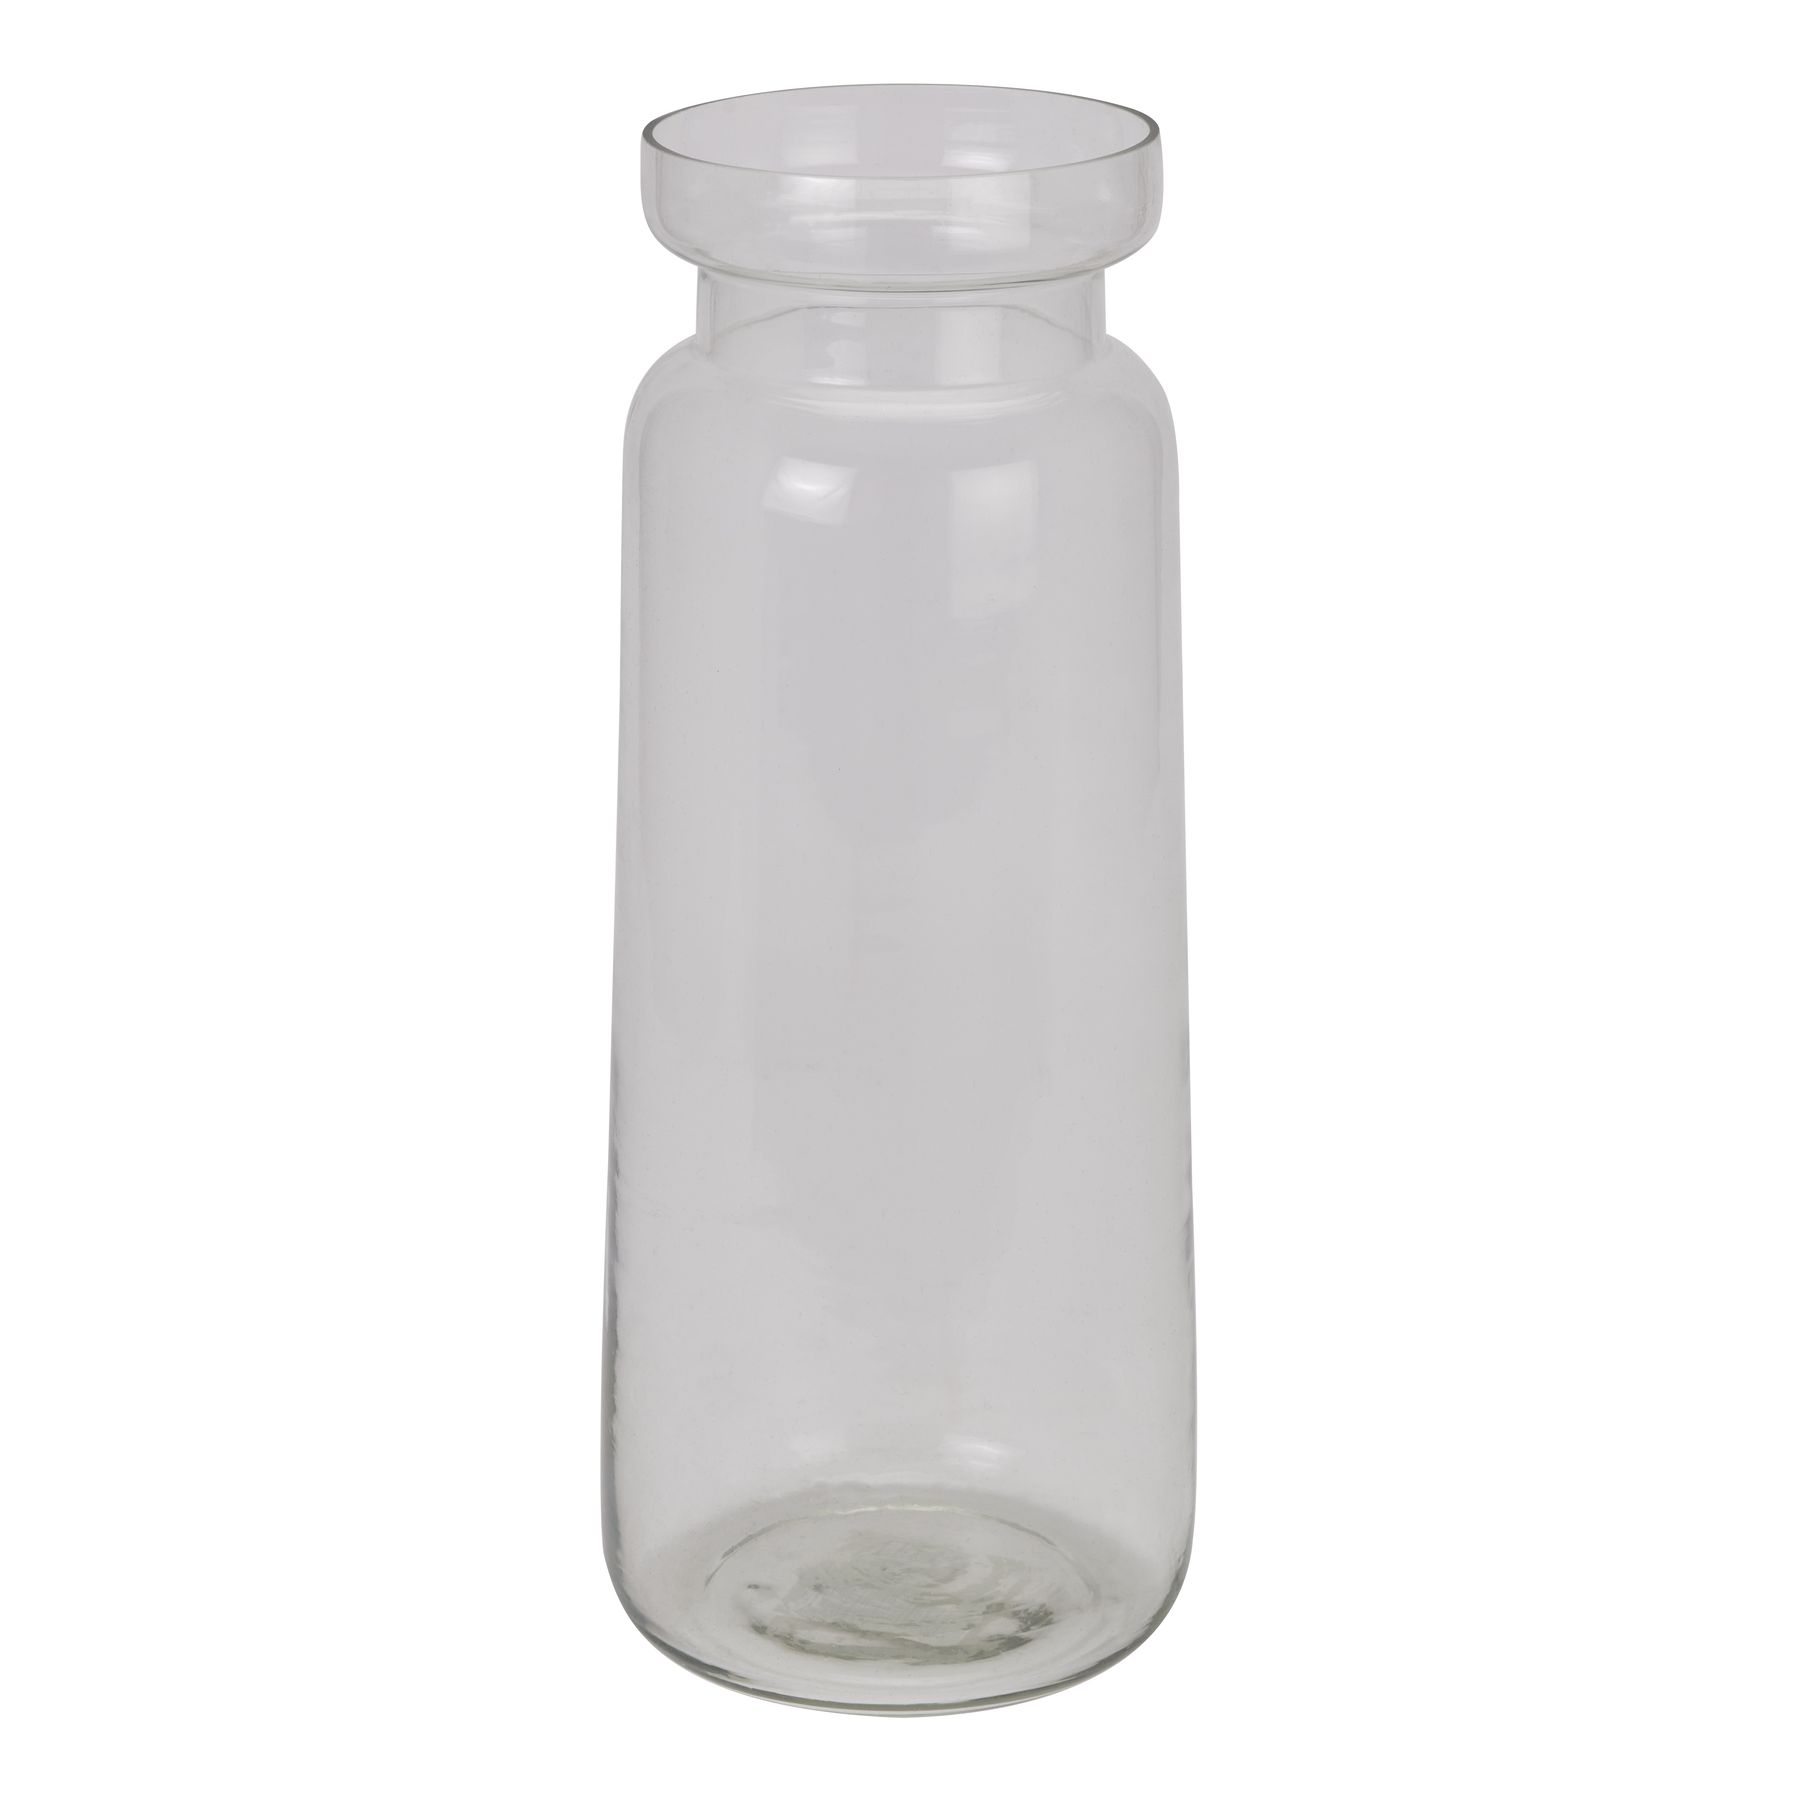 Tall Clear Bottle Vase - Image 1